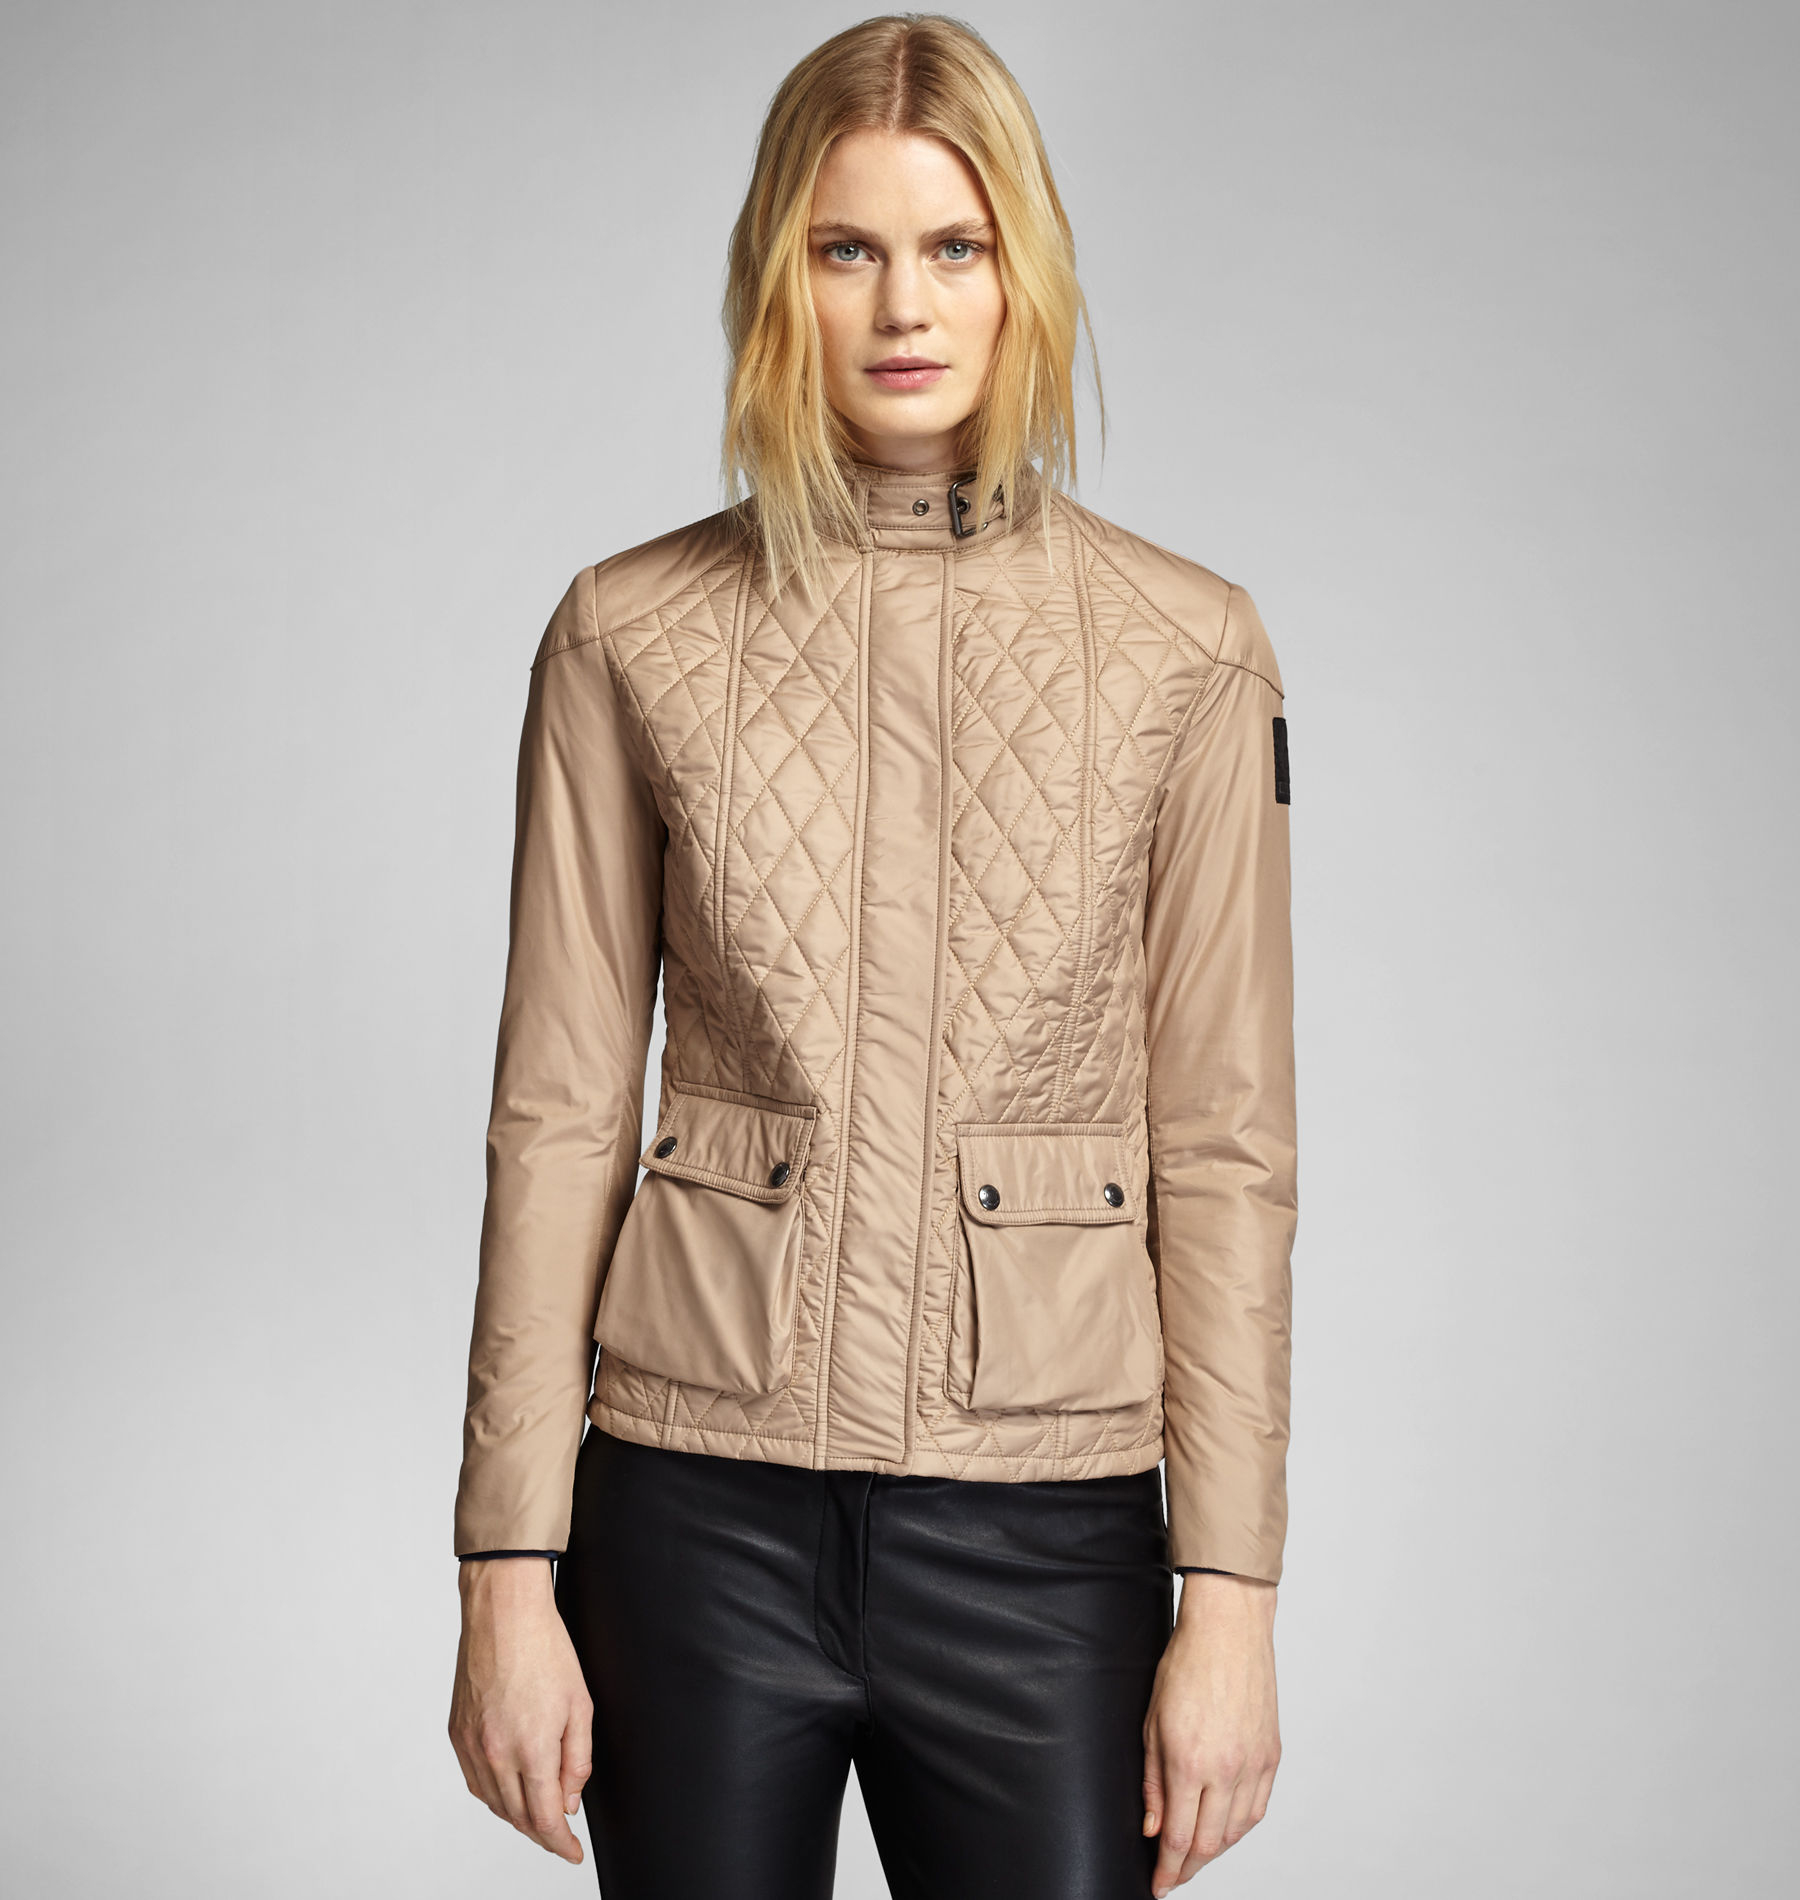 Belstaff Aynsley Jacket in Taupe (Natural) - Lyst